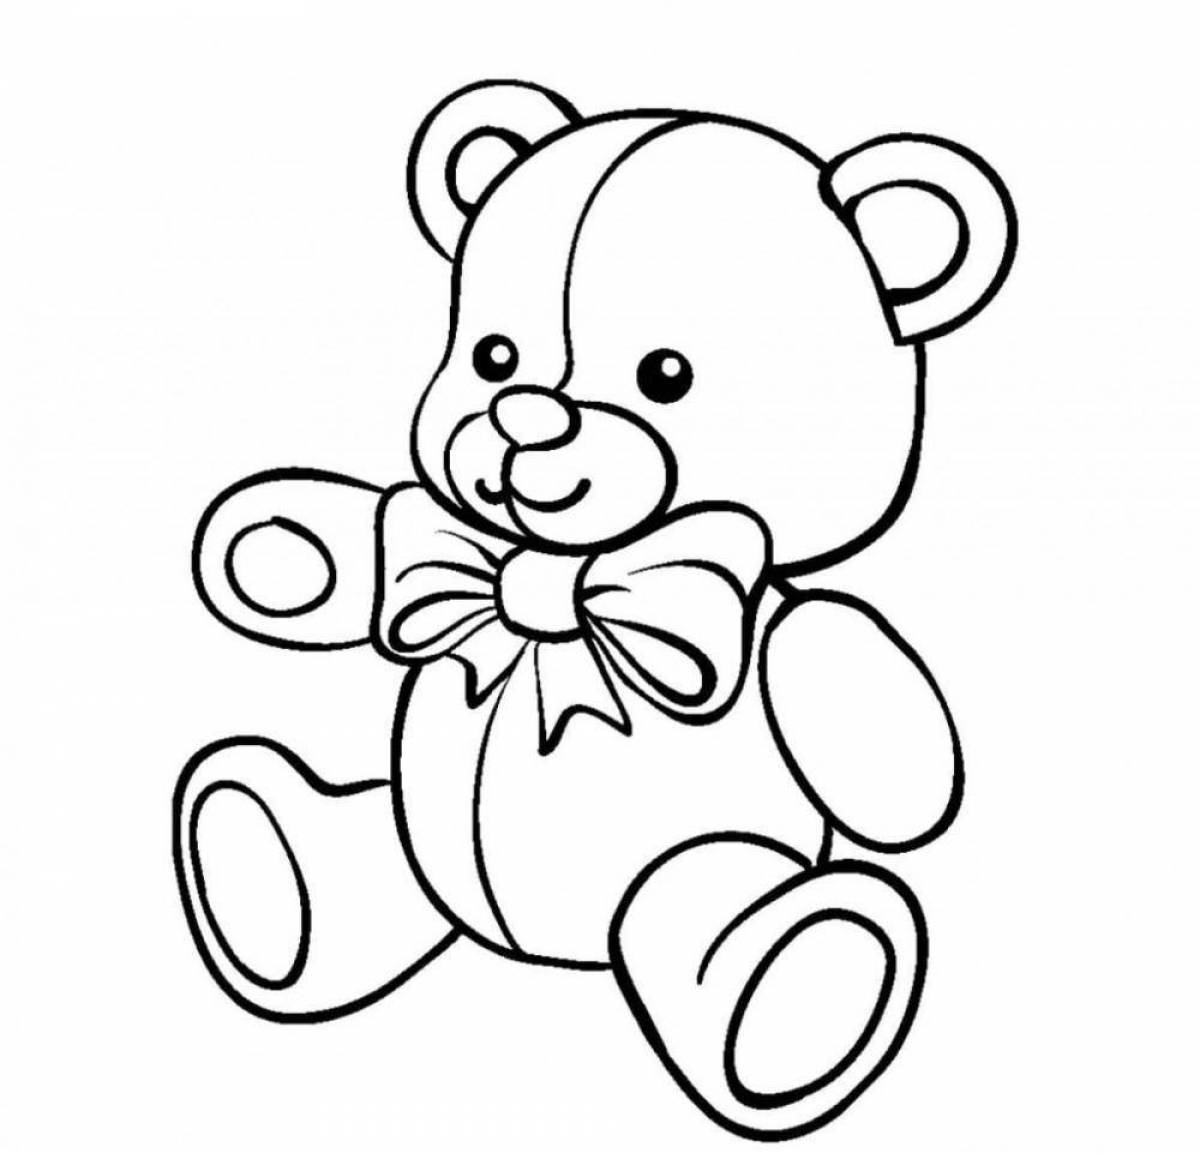 Coloring book loving teddy bear with a heart